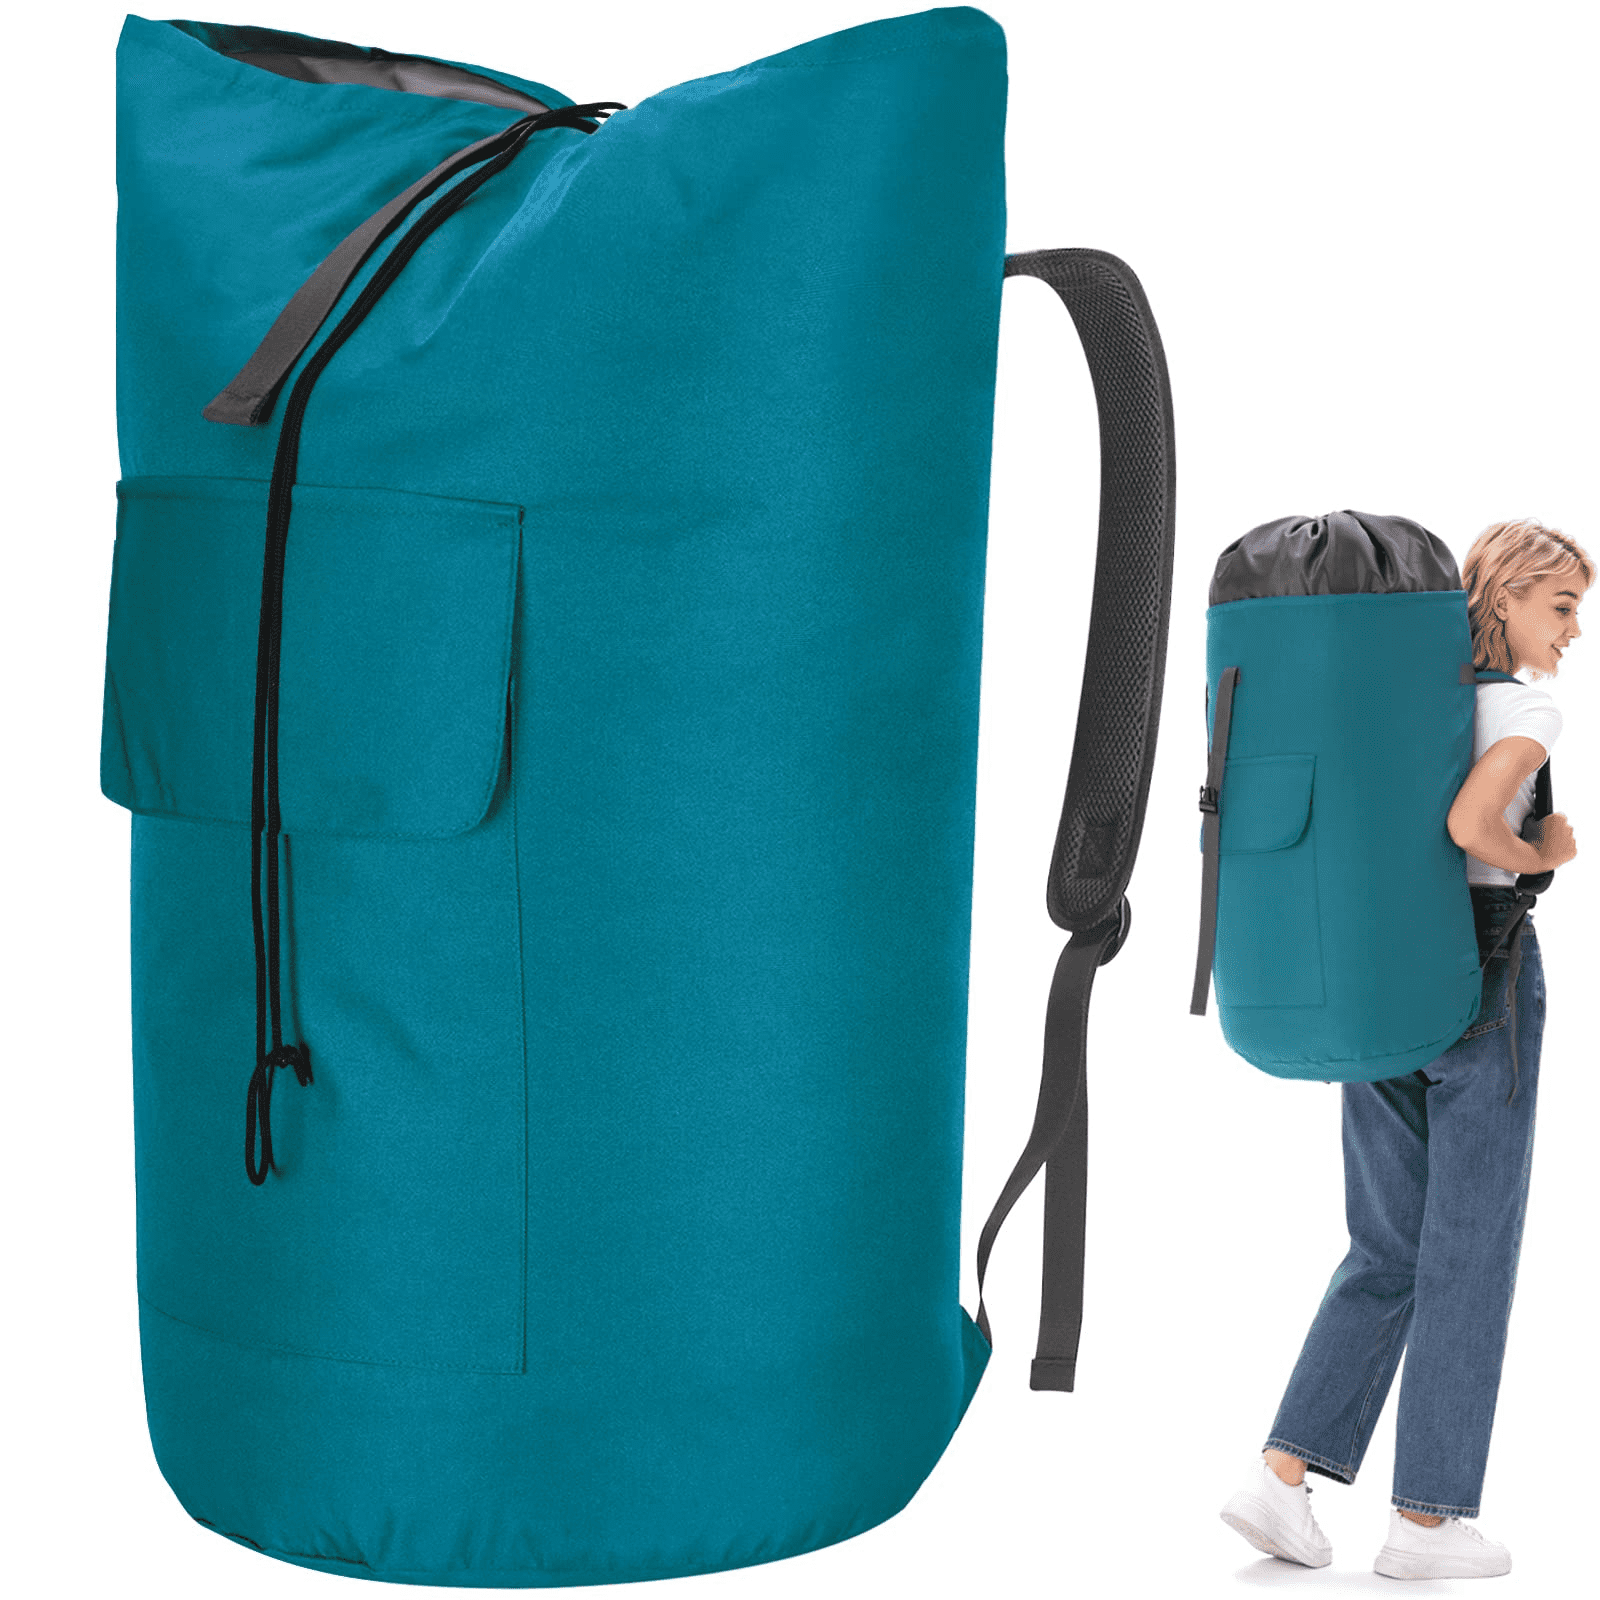  Laundry Bag Backpack Extra Large, 115L Laundry Backpack with  Padded Shoulder Strap, Sturdy Travel Laundry Bag, Hanging laundry bag for  College Dorm, Apartment, Durable Laundry Backpack Bag : Home & Kitchen